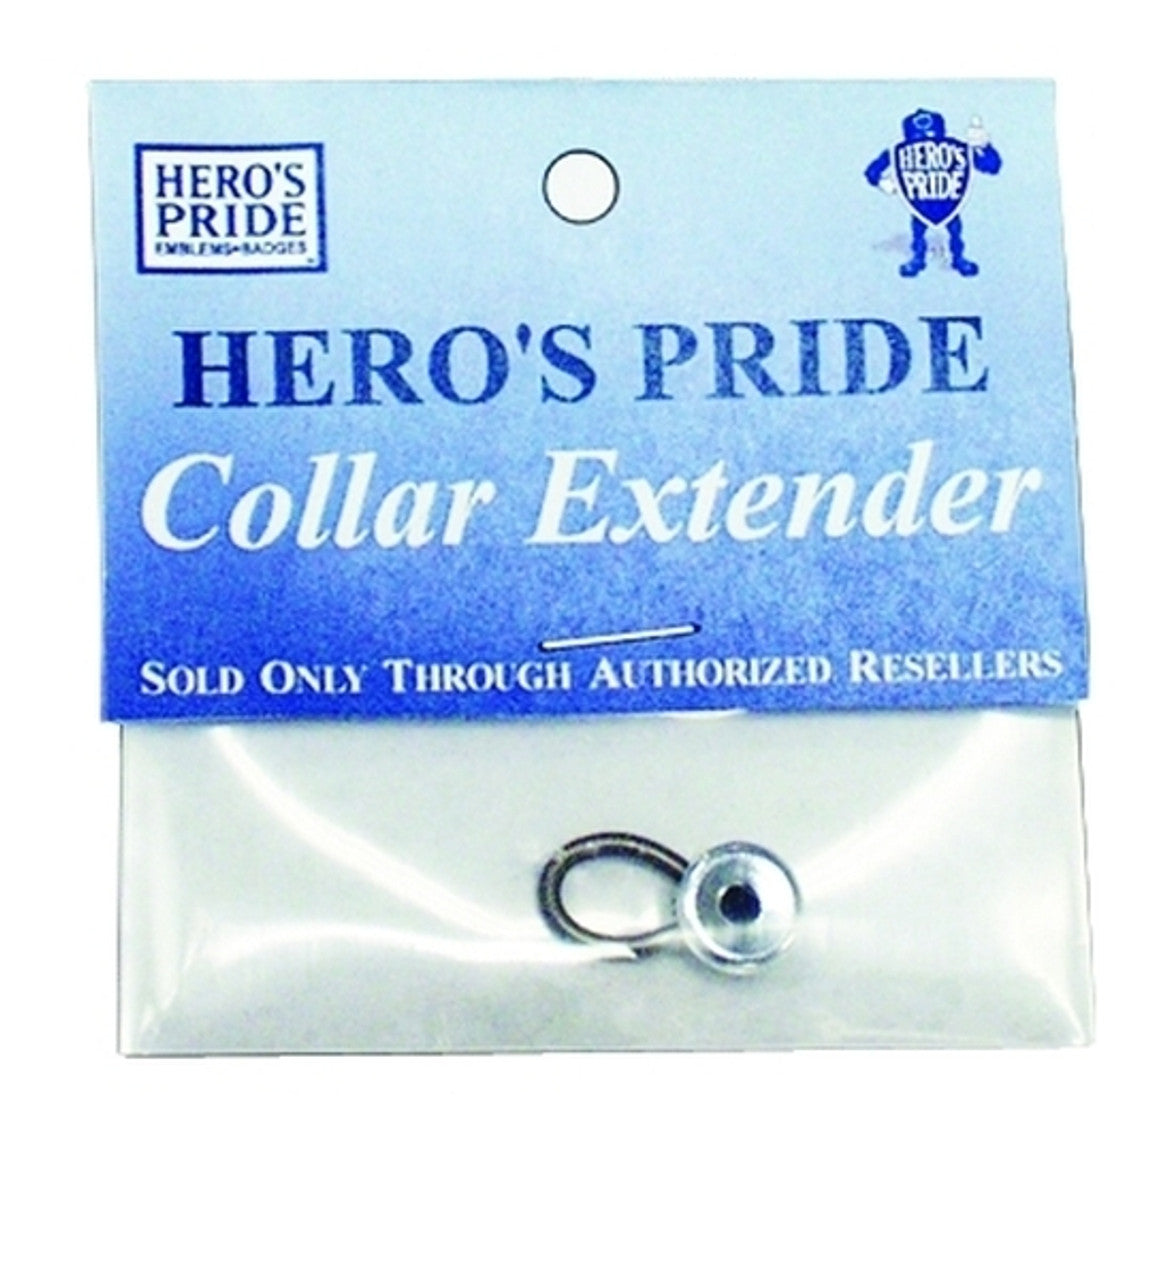 COLLAR EXTENDERS (ADDS UP TO 1/2" TO SHIRT SIZE), NICKEL, 10MM